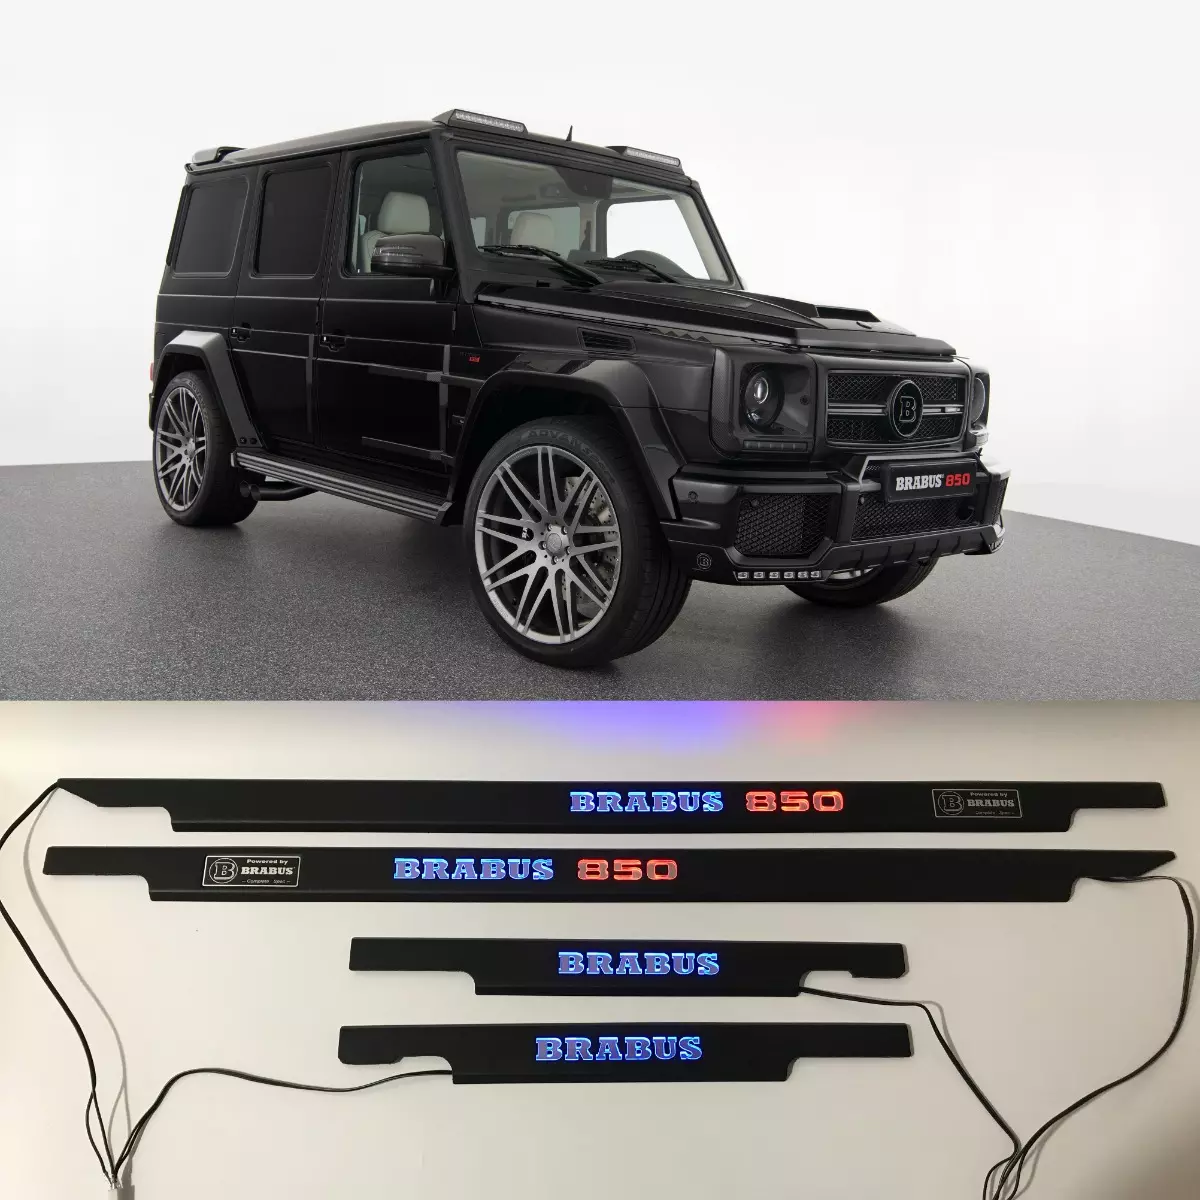 Brabus 850 Stainless Steel LED Door Sills Set 4 pcs for W463 G-Class Mercedes-Benz